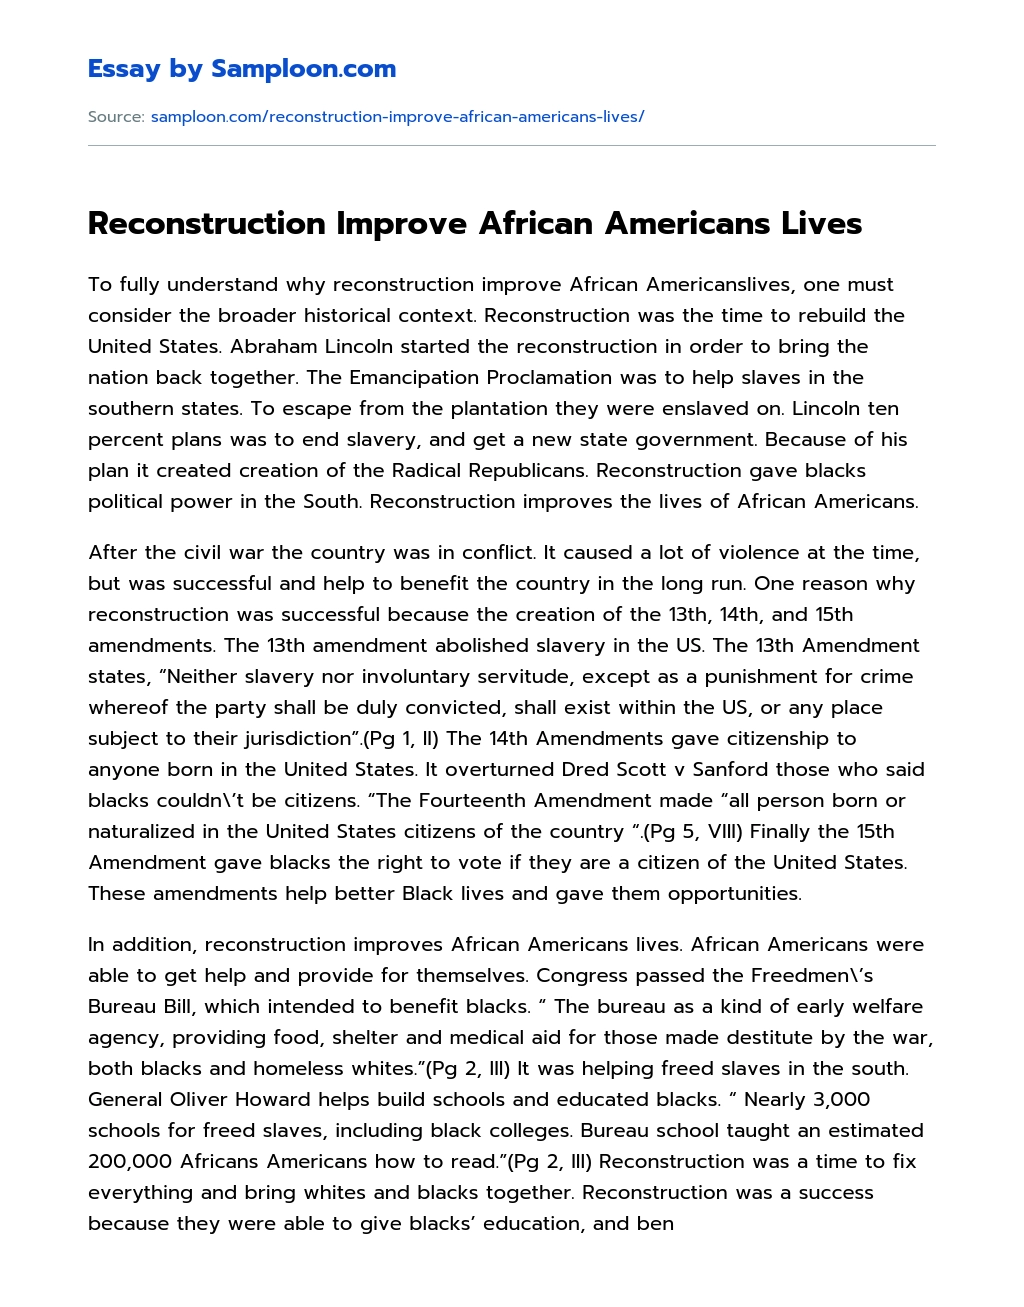 Reconstruction Improve African Americans Lives essay